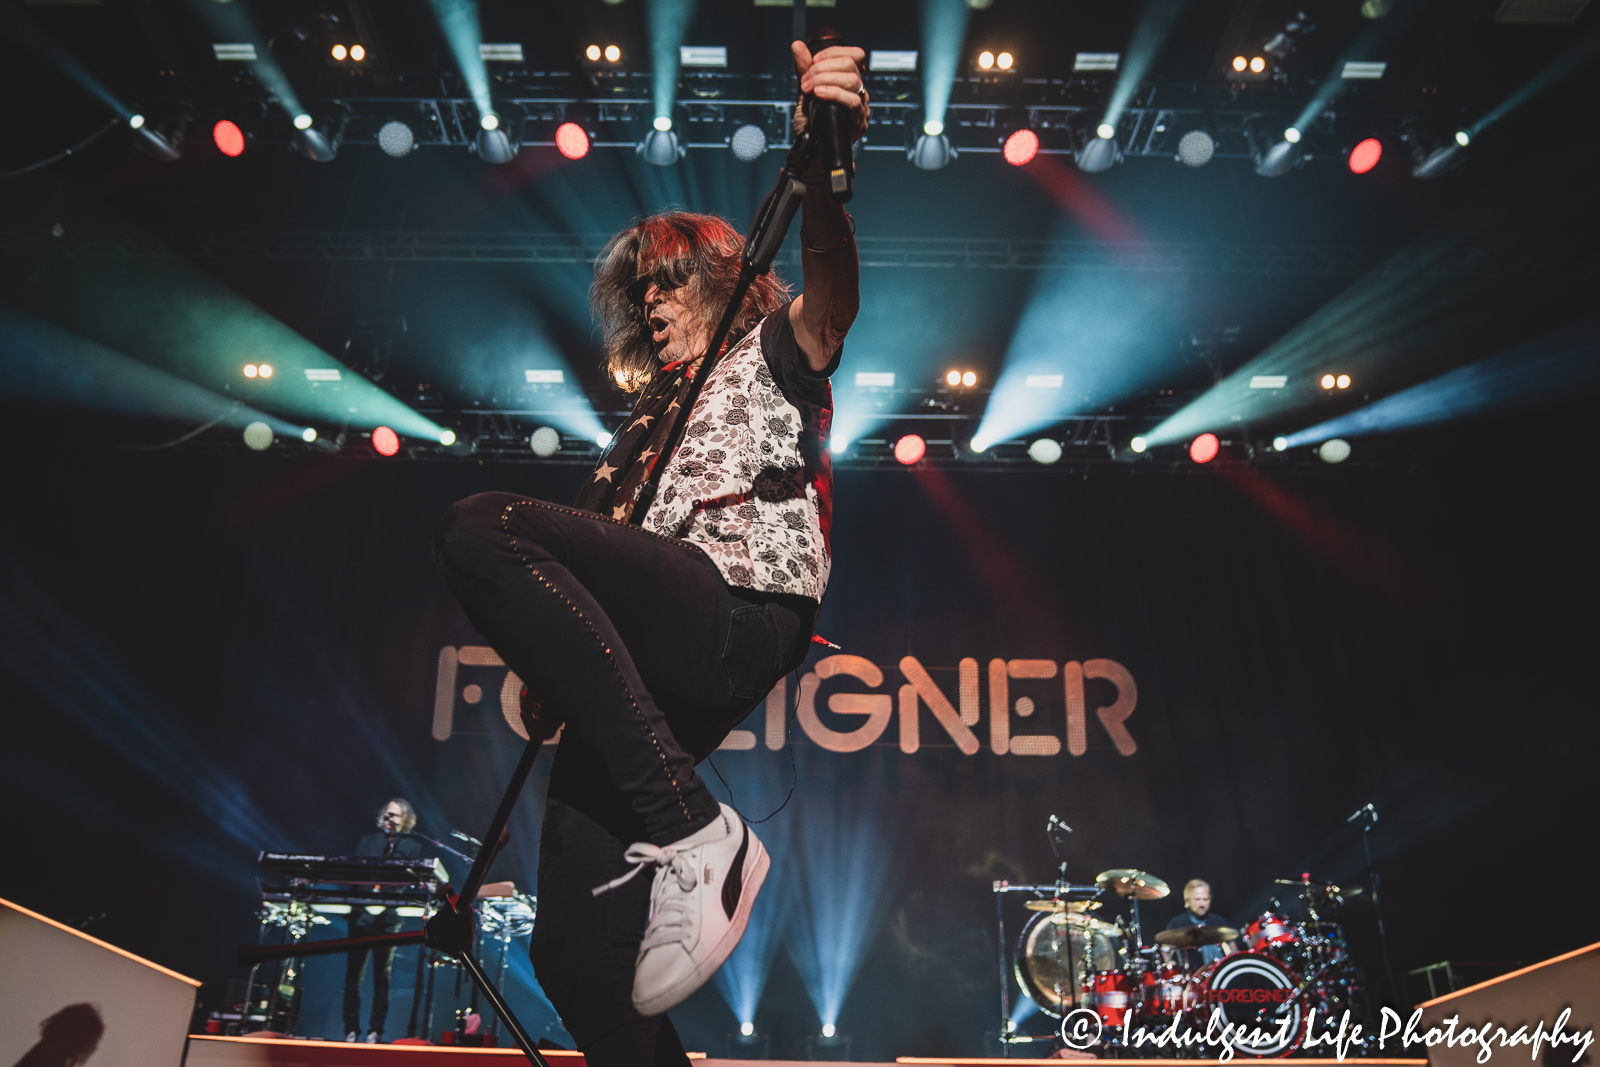 Foreigner lead singer Kelly Hansen performing "Double Vision" with keyboardist Michael Bluestein and drummer Chris Frazier at Hartman Arena in Park City, KS on April 30, 2023.